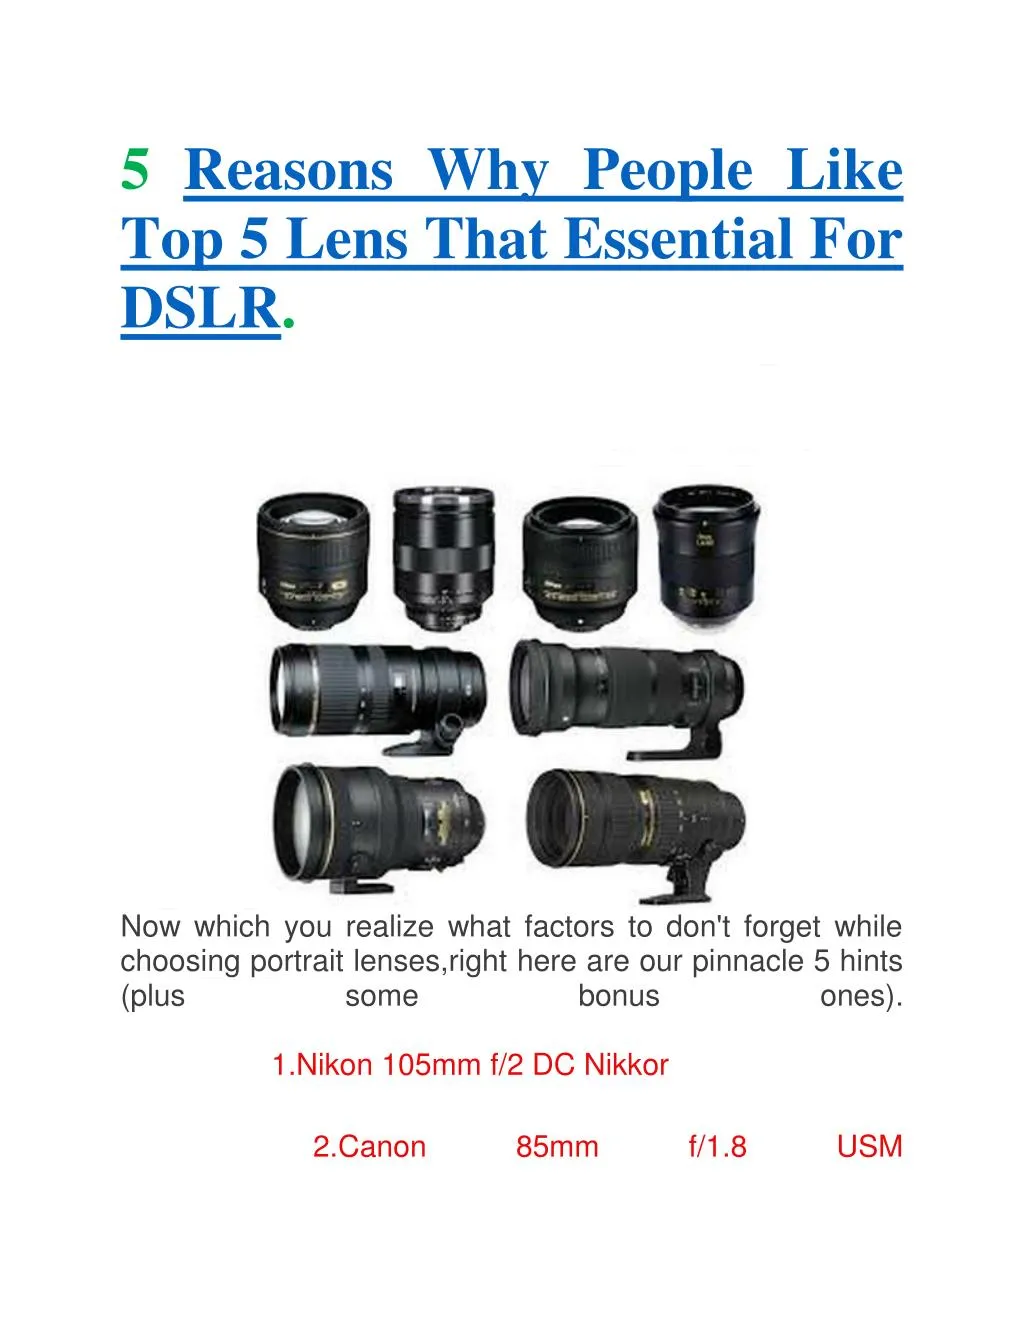 5 reasons why people like top 5 lens that